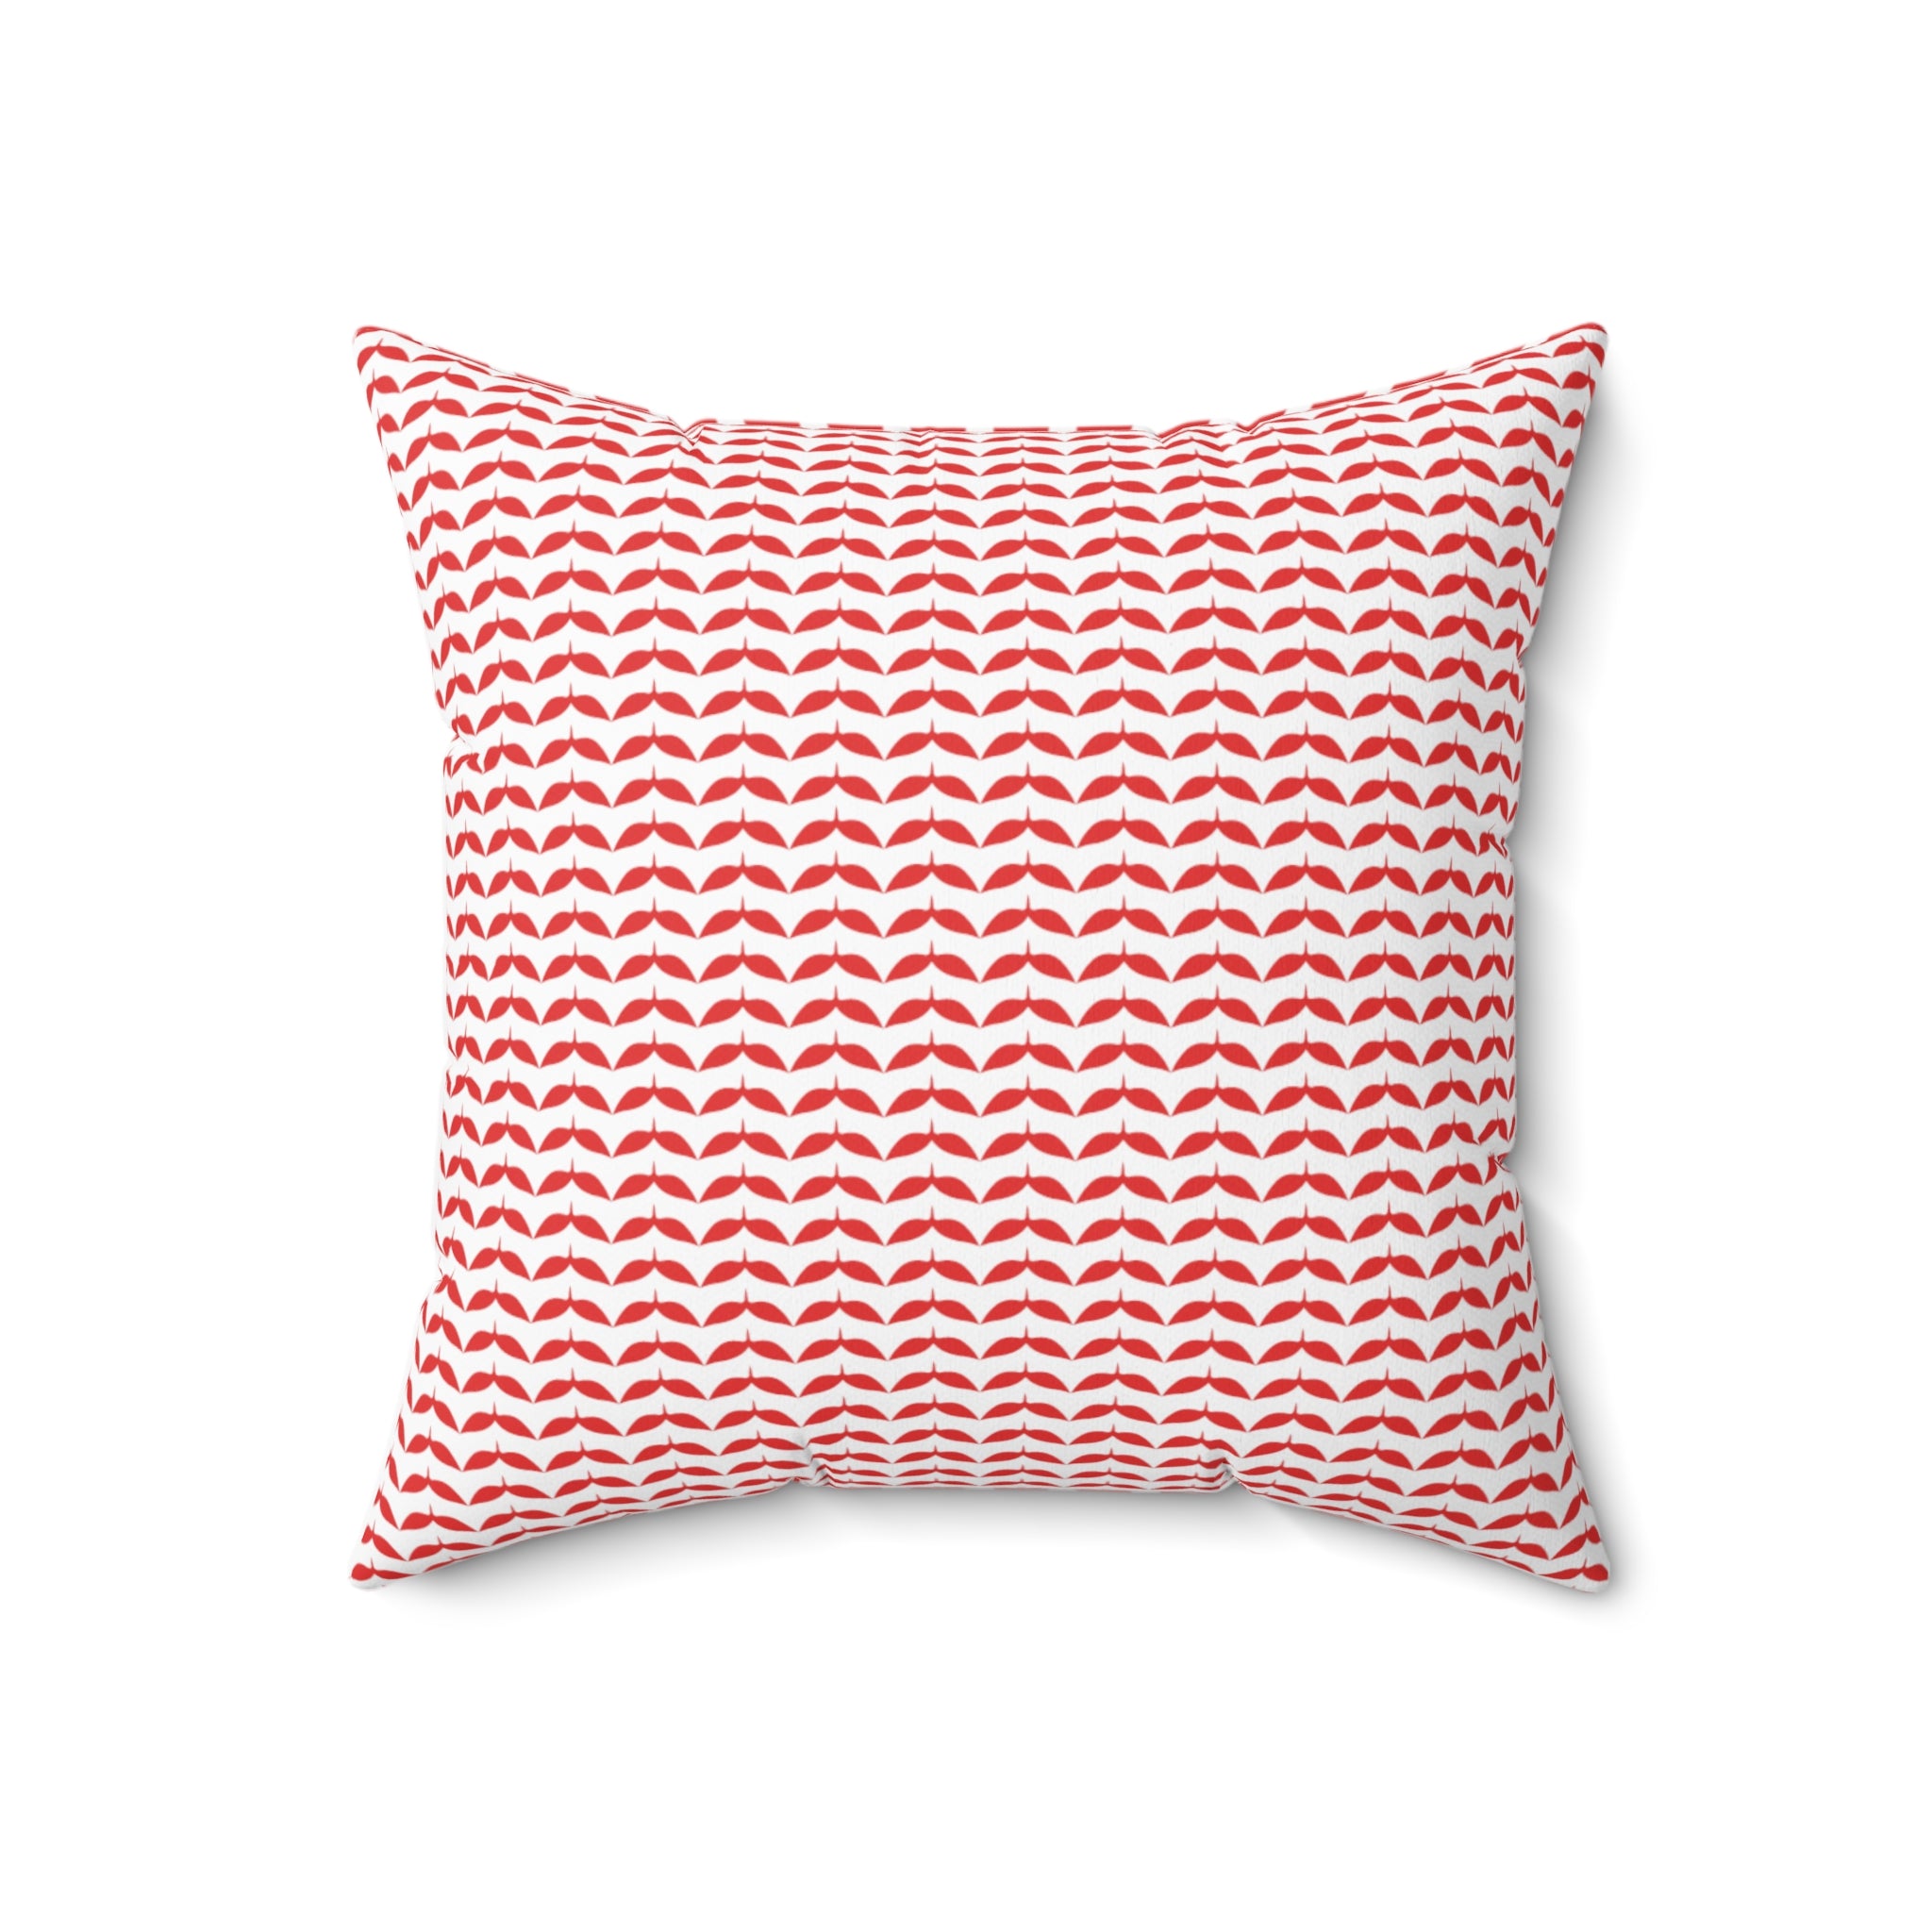 PALESTINE Collection: Olive Leaves Patterned Square Pillow